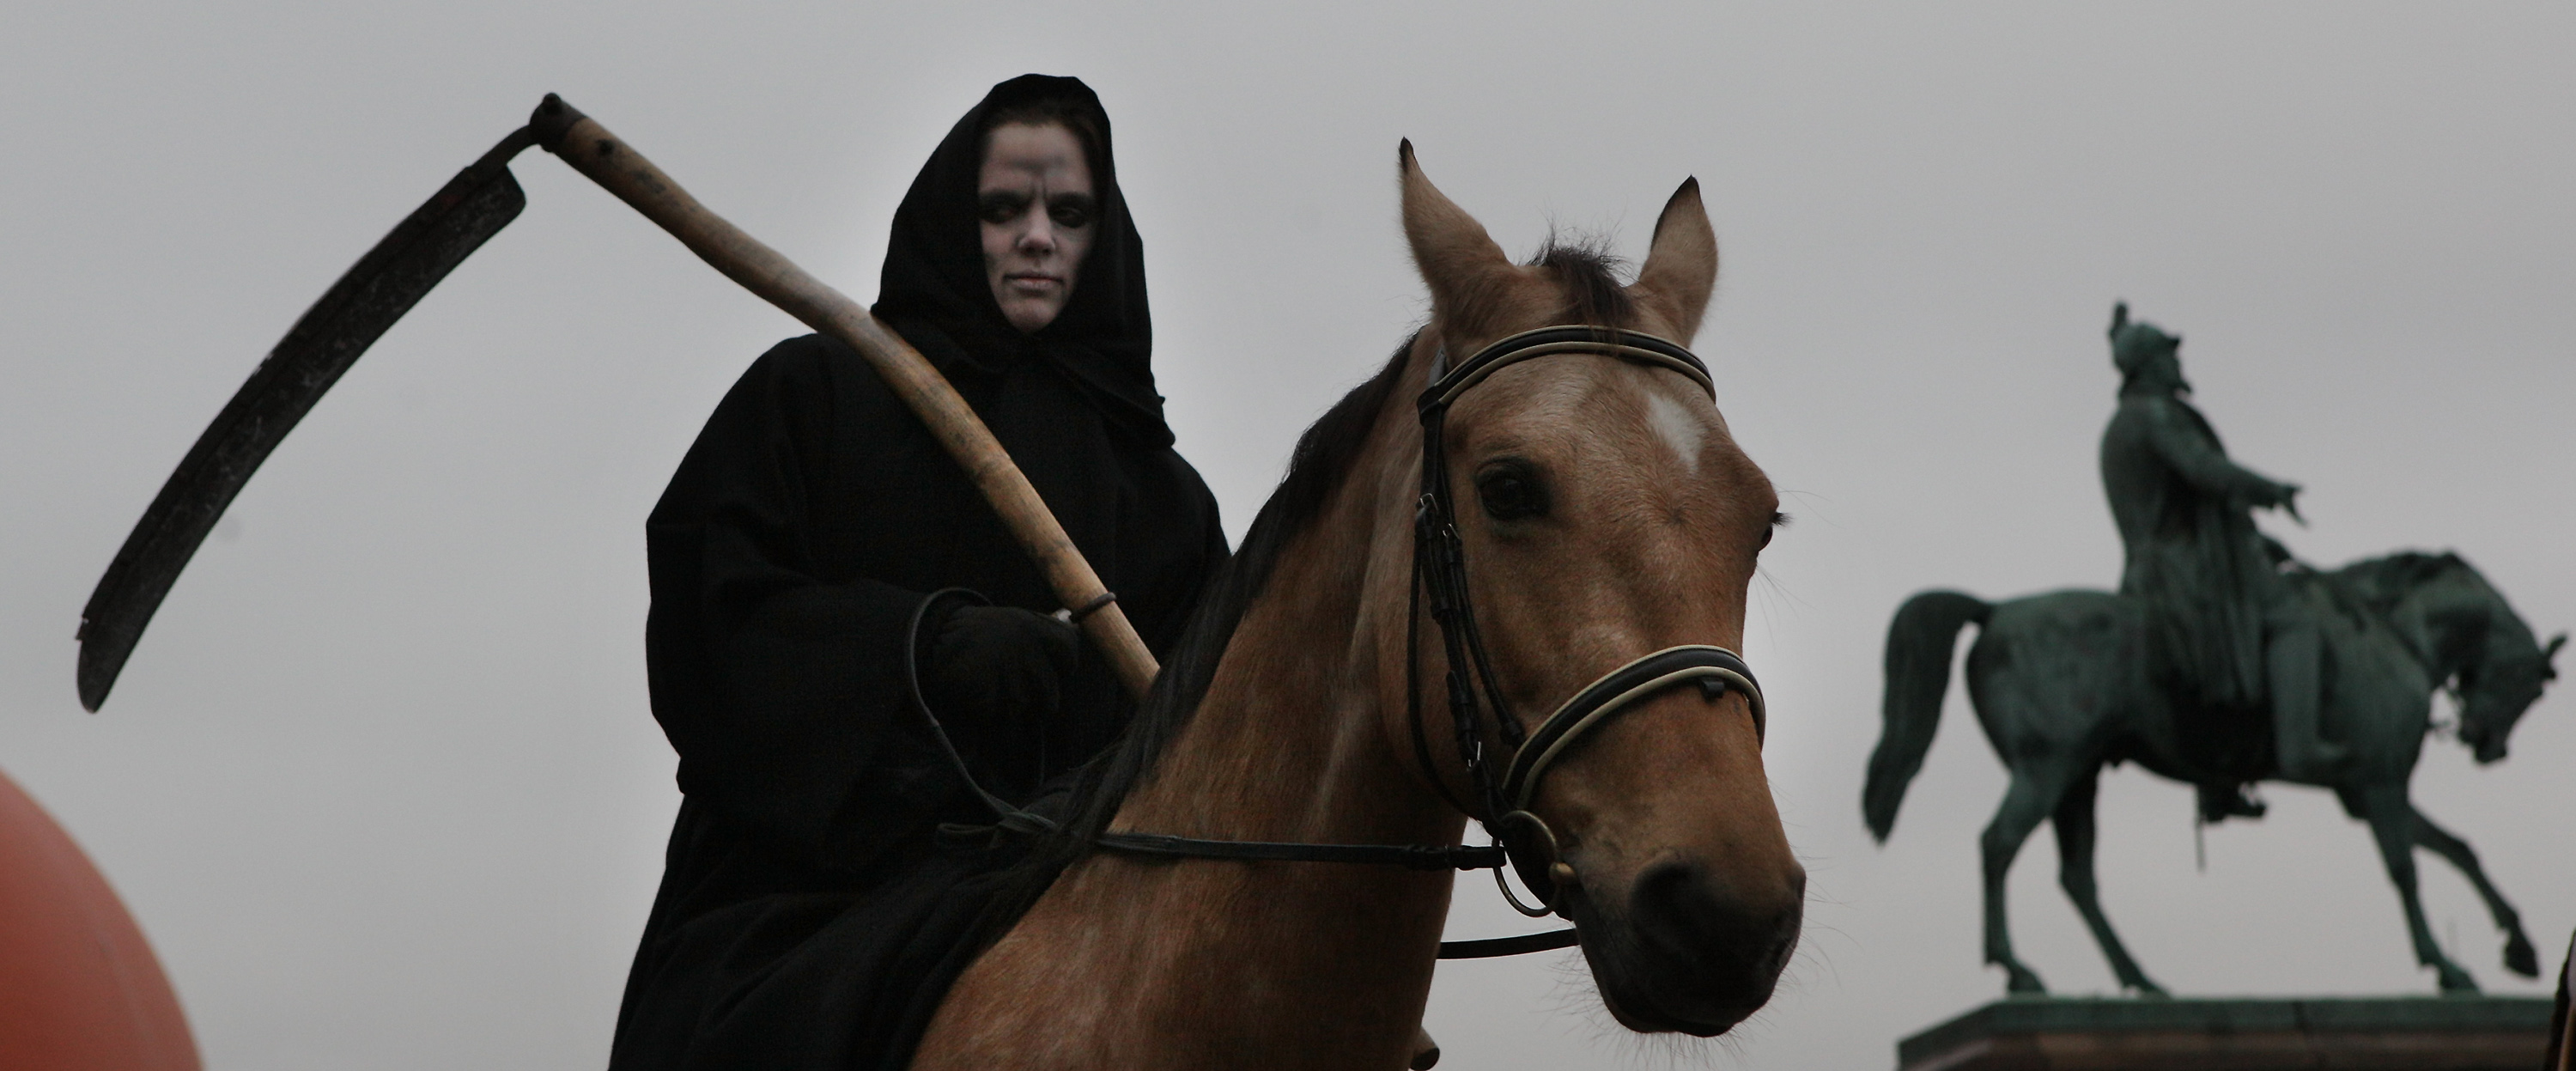 A protester dressed as Death on a horse.